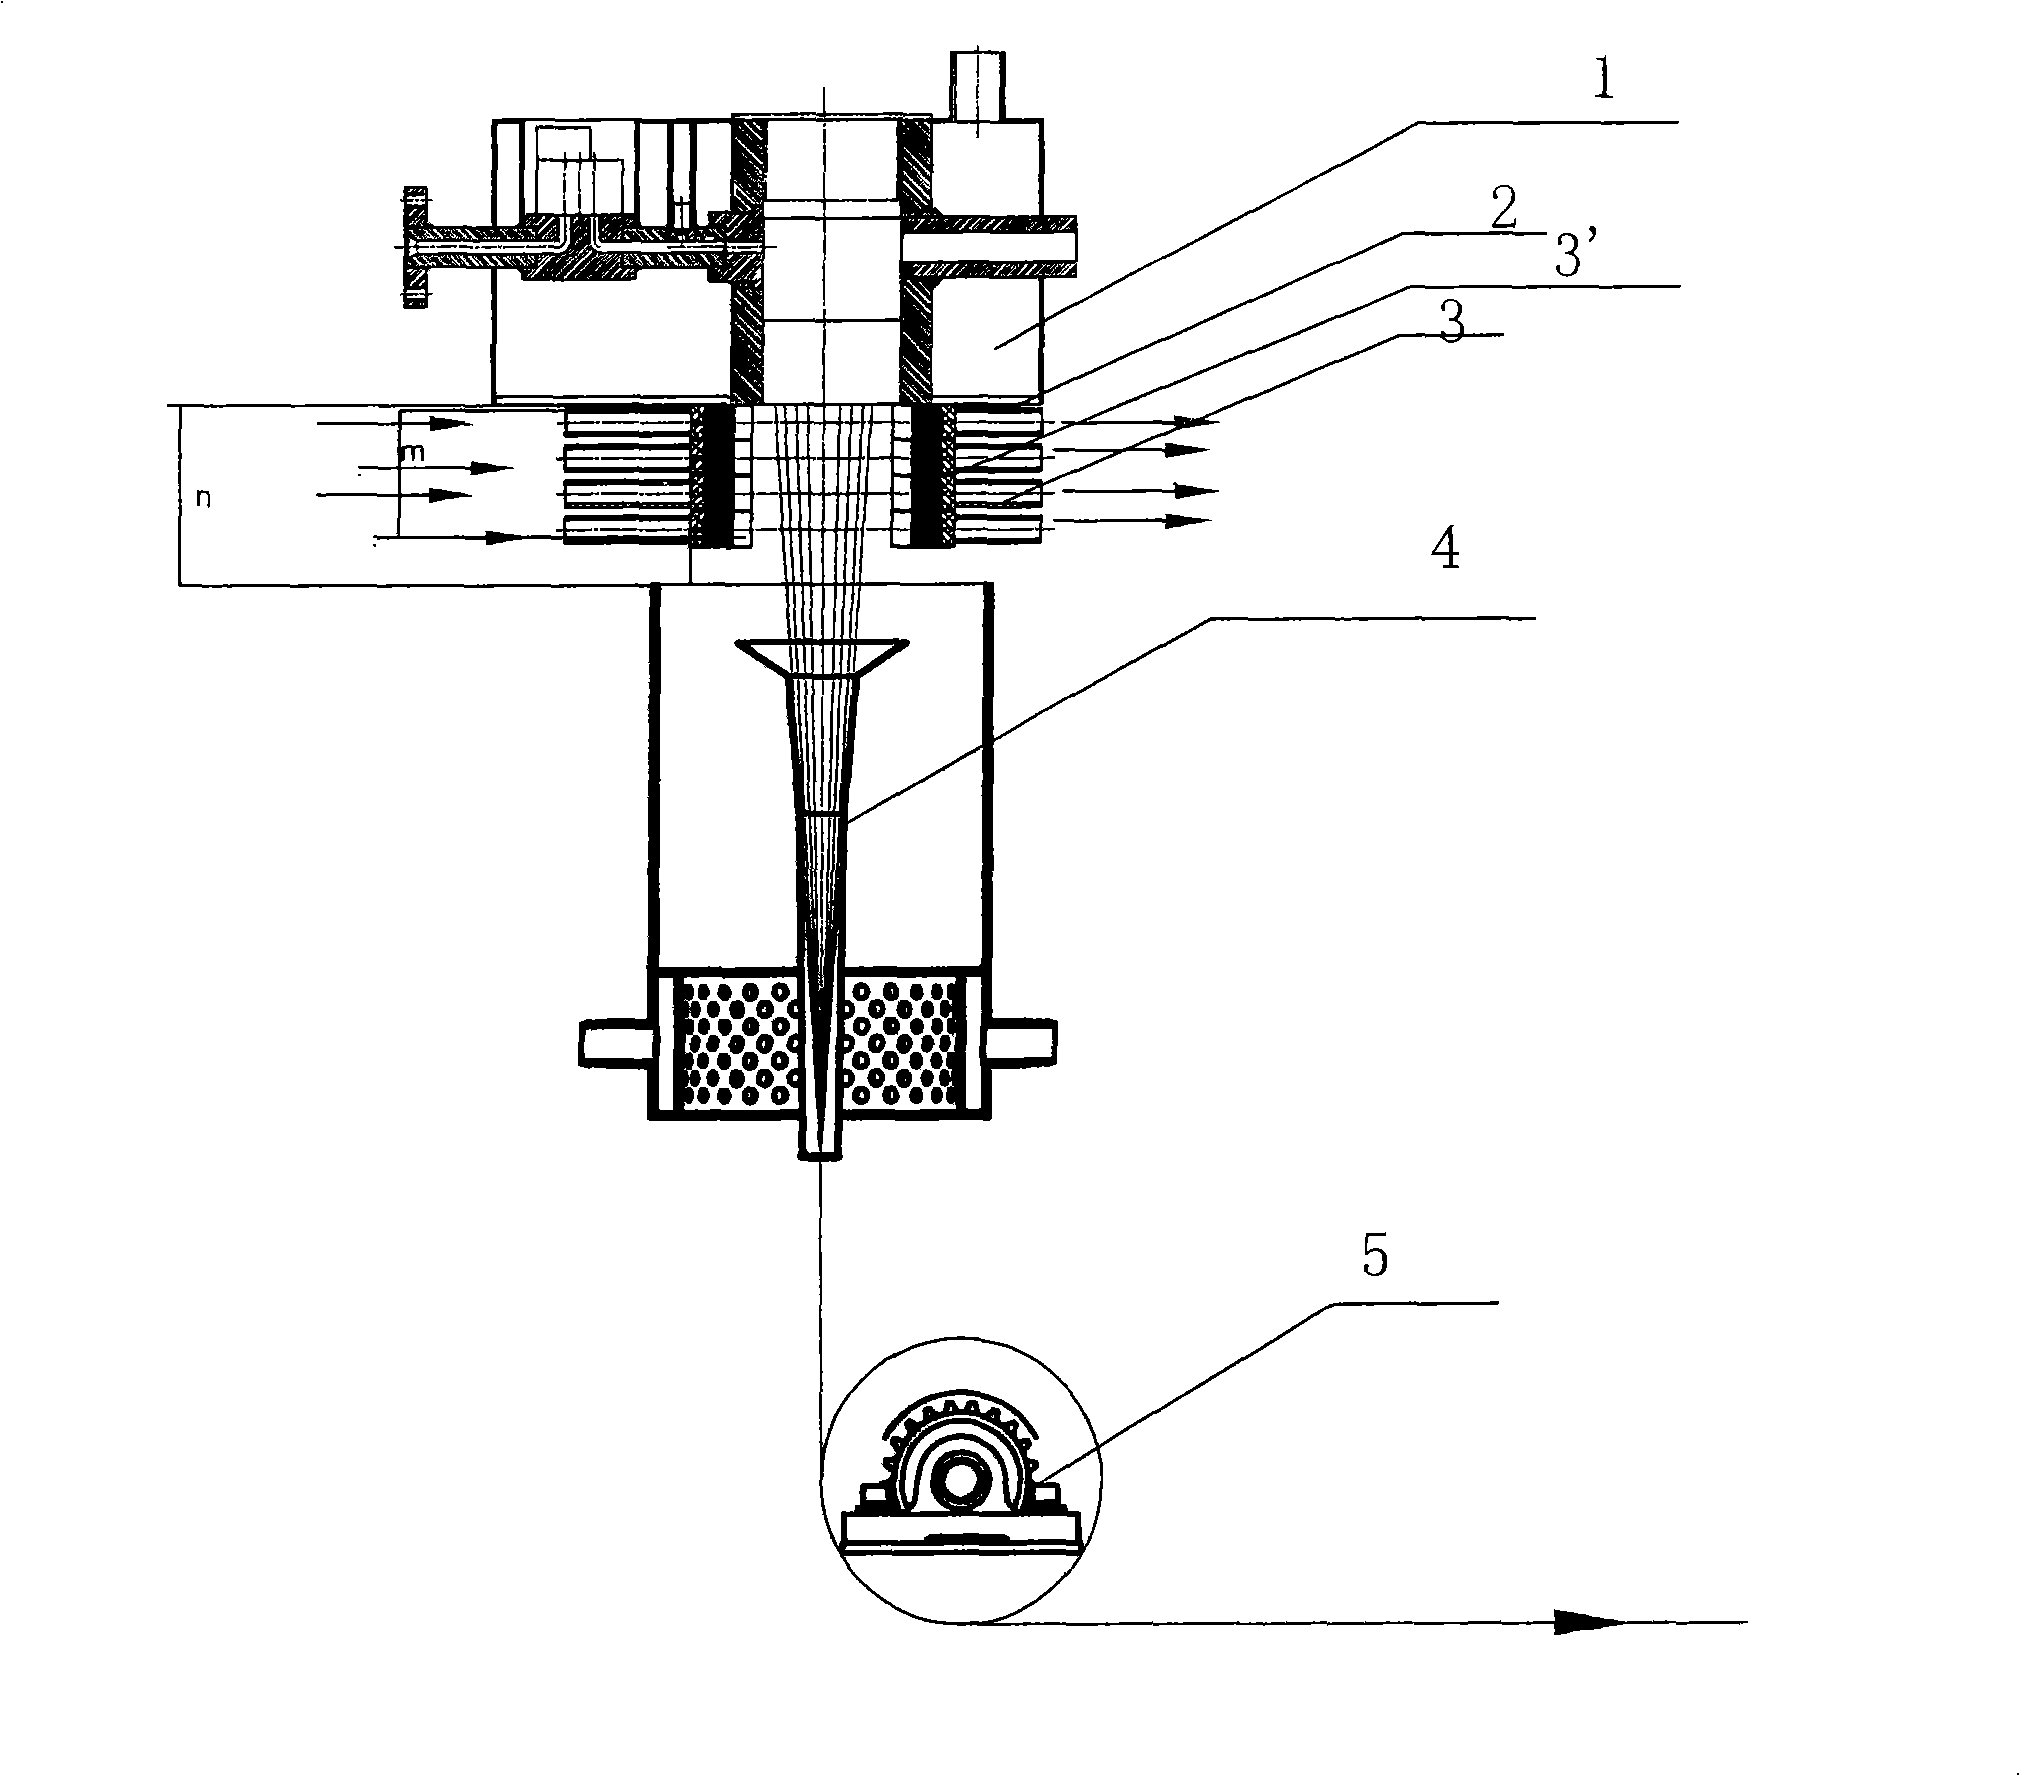 Spinning process of cellulose fibre and integration apparatus